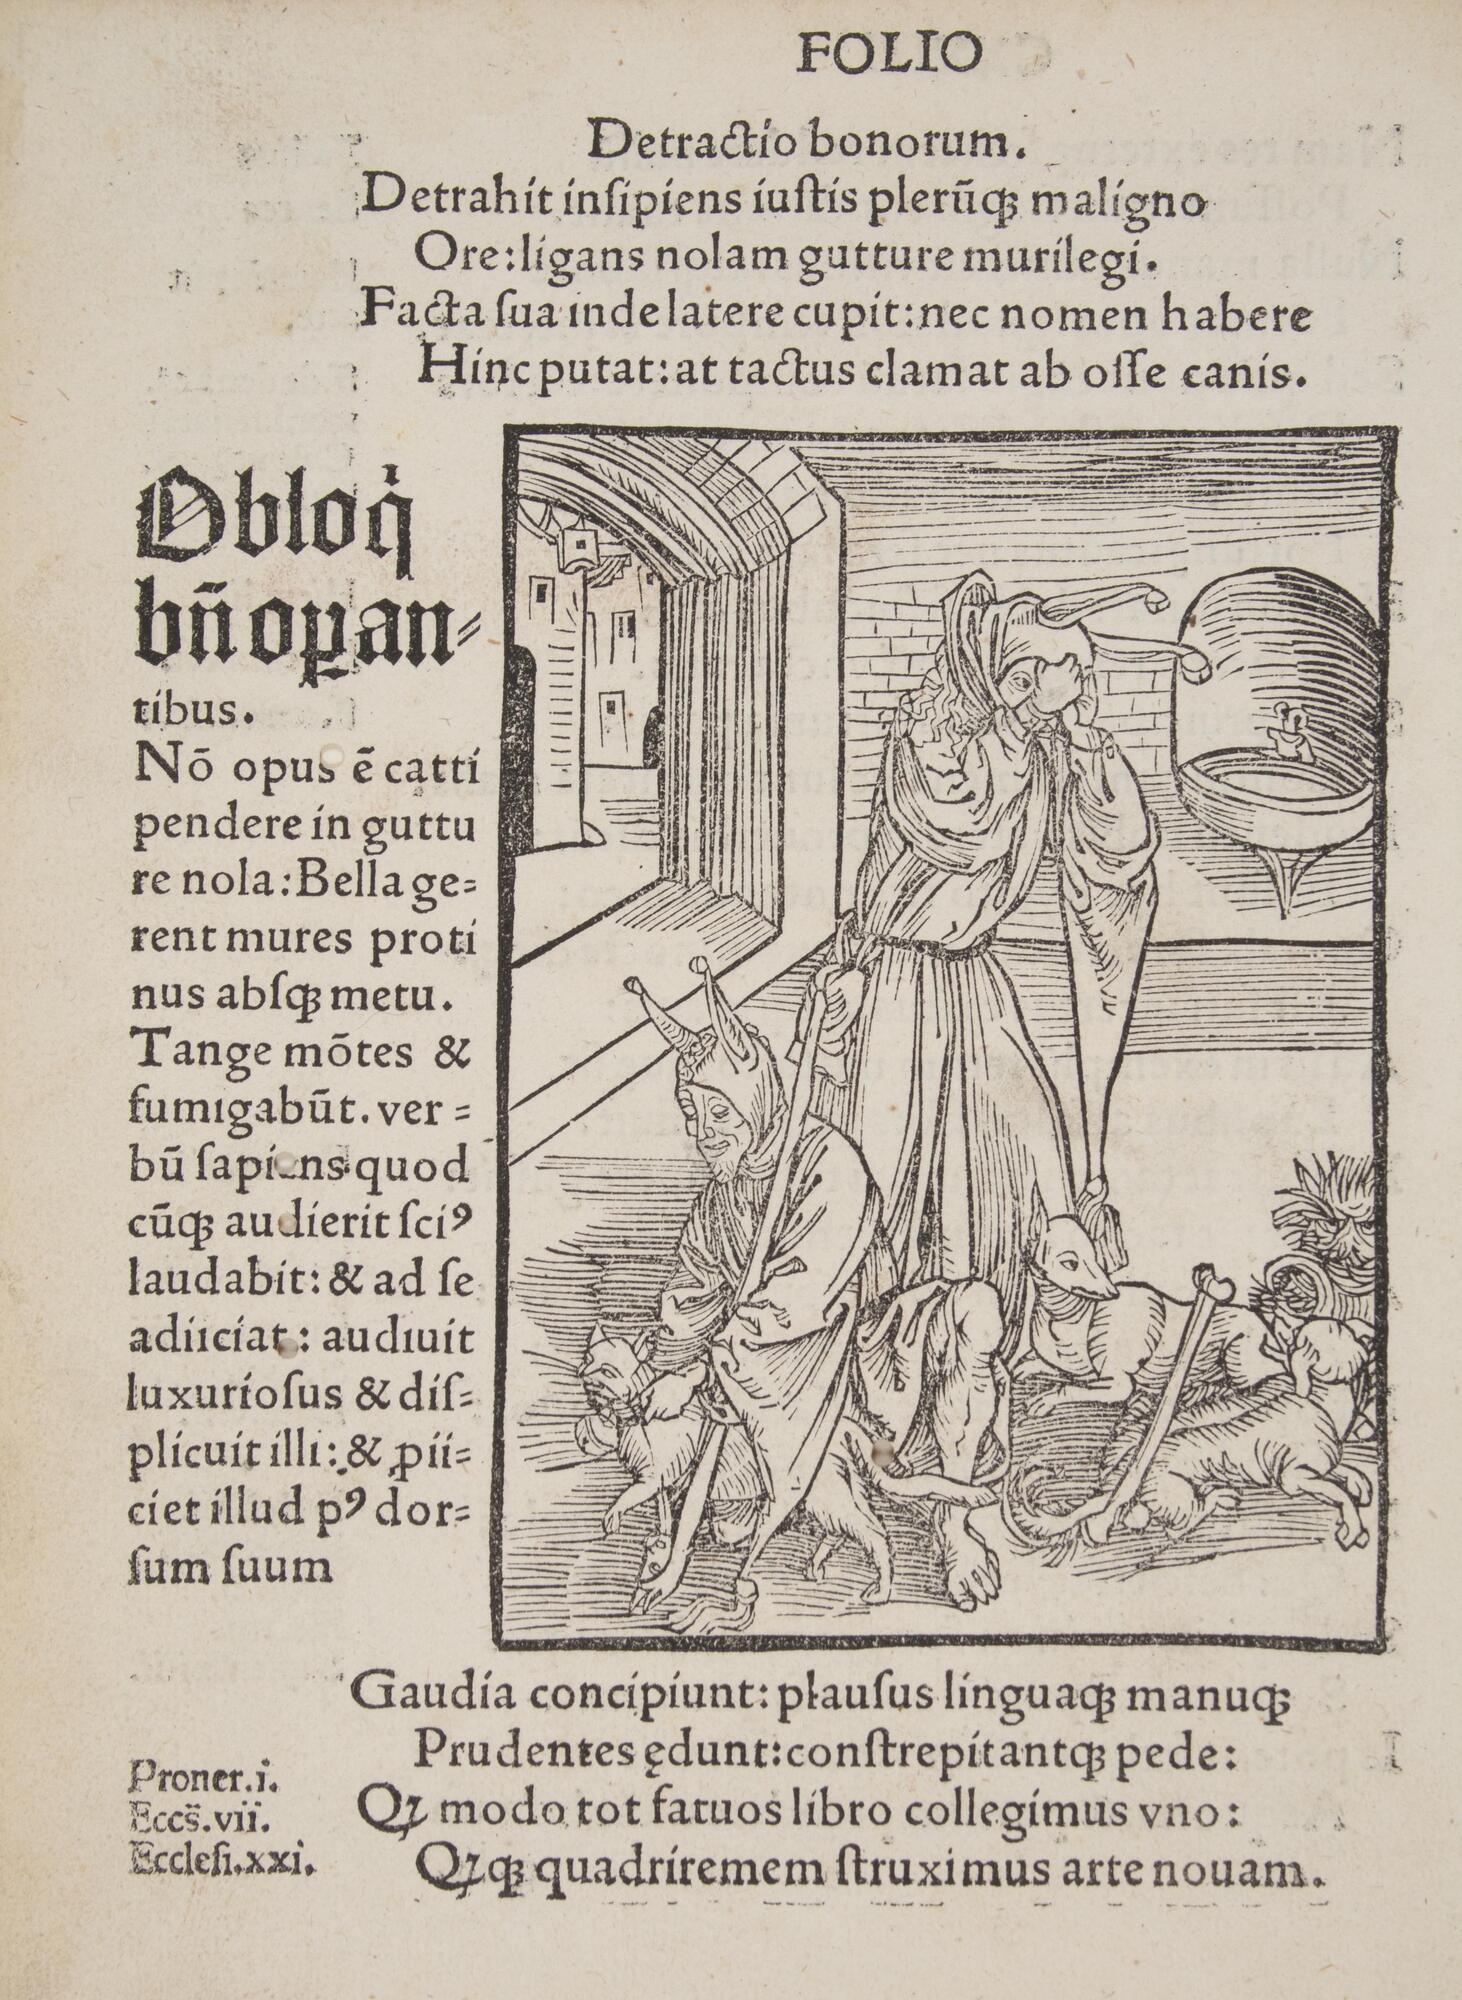 Text on both sides. One side has the image of a man with dogs at his feet. There is also a jester at his feet, kneeling down.